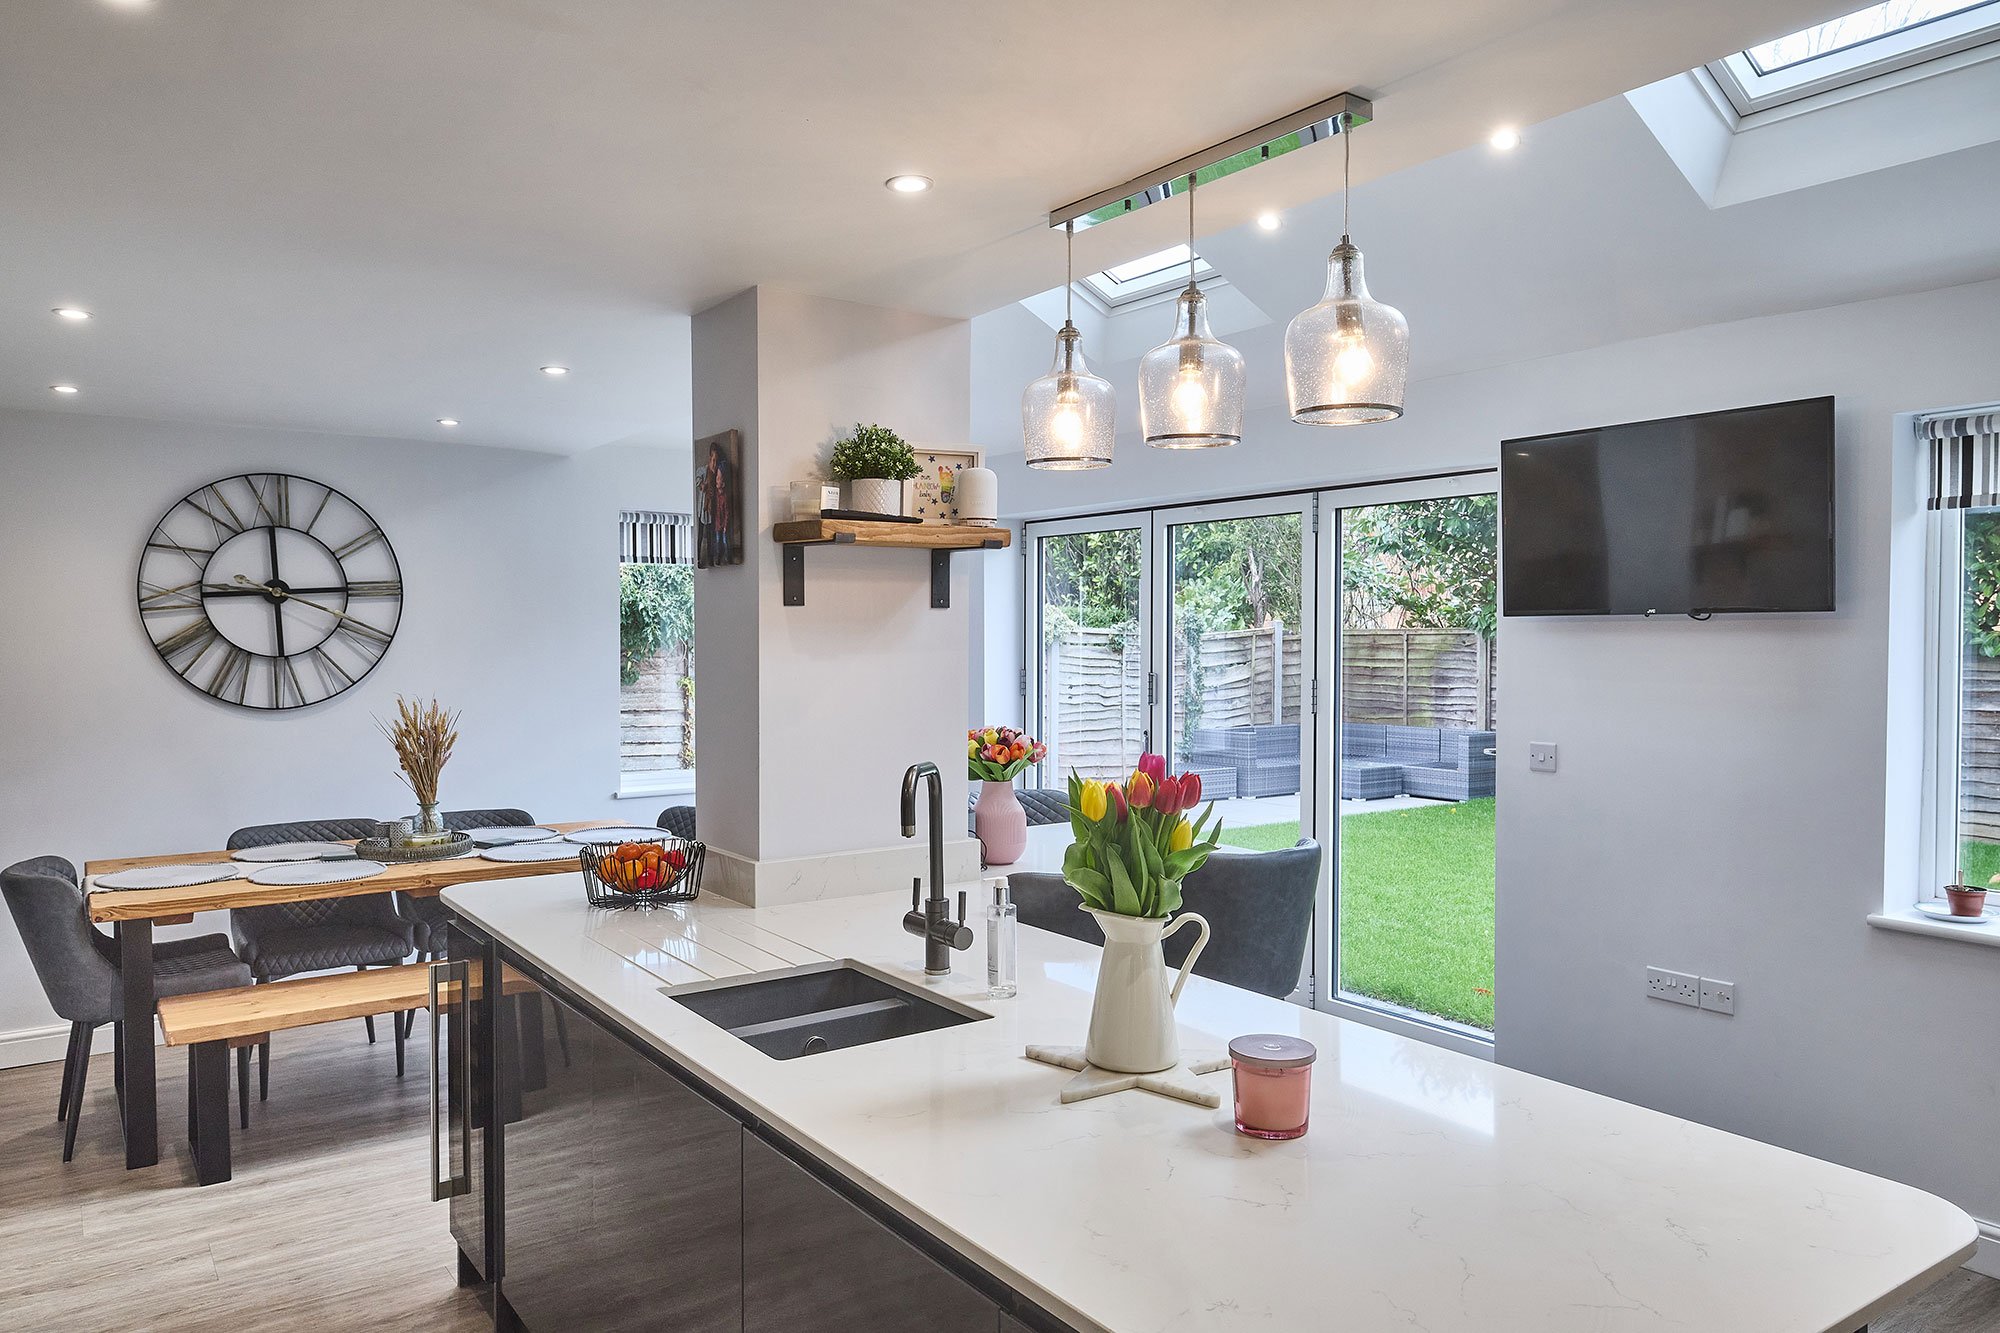 Conversion to open plan kitchen and dining area with bifold doors